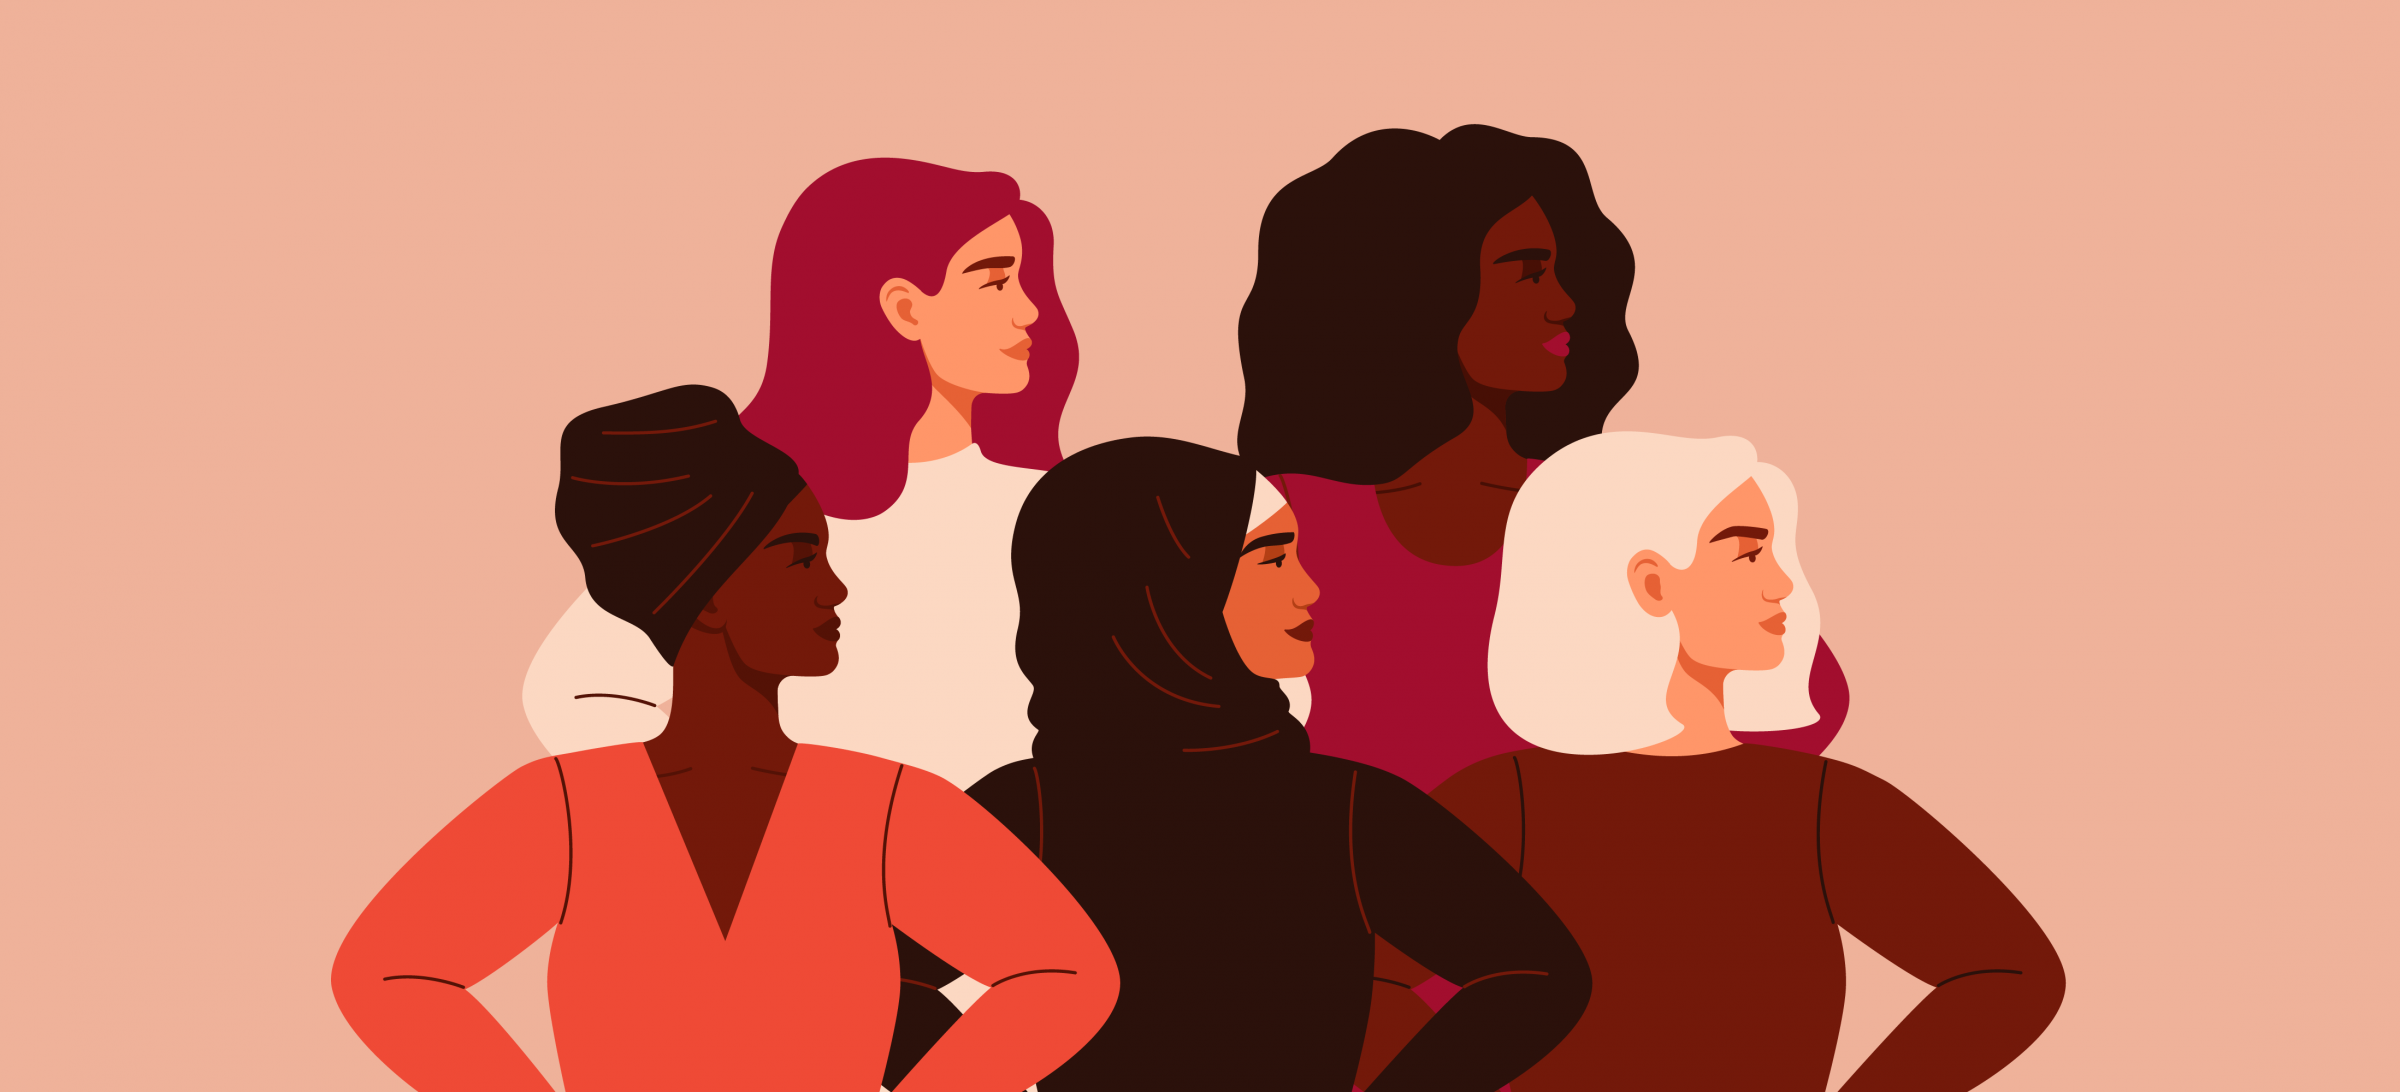 Graphic depicting a group of women.